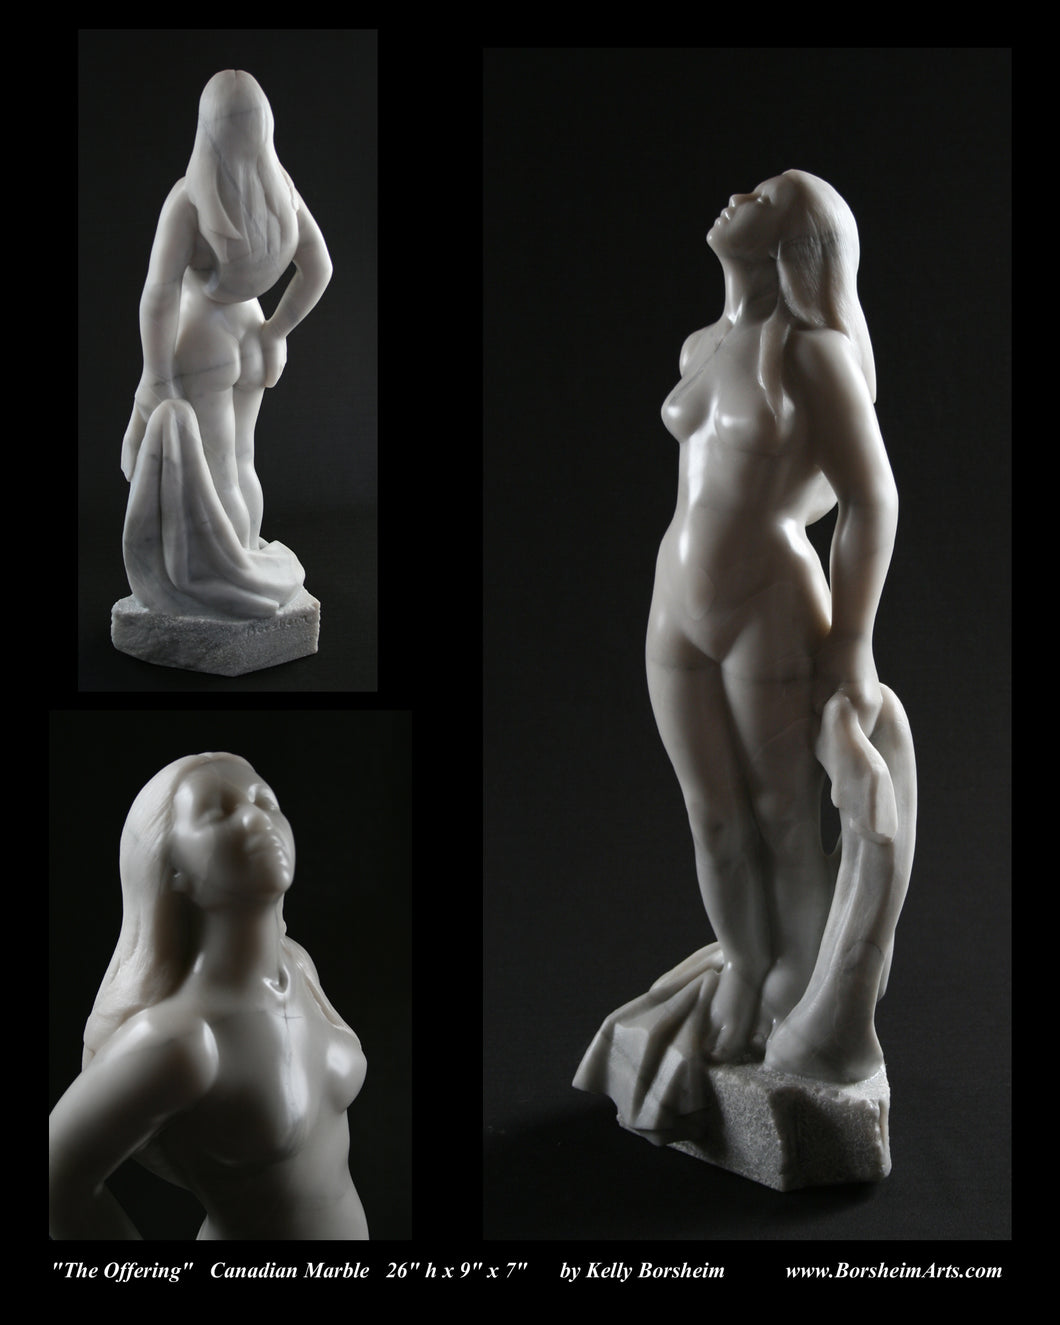 The Offering Vulnerable Woman Sculpture Canadian Marble